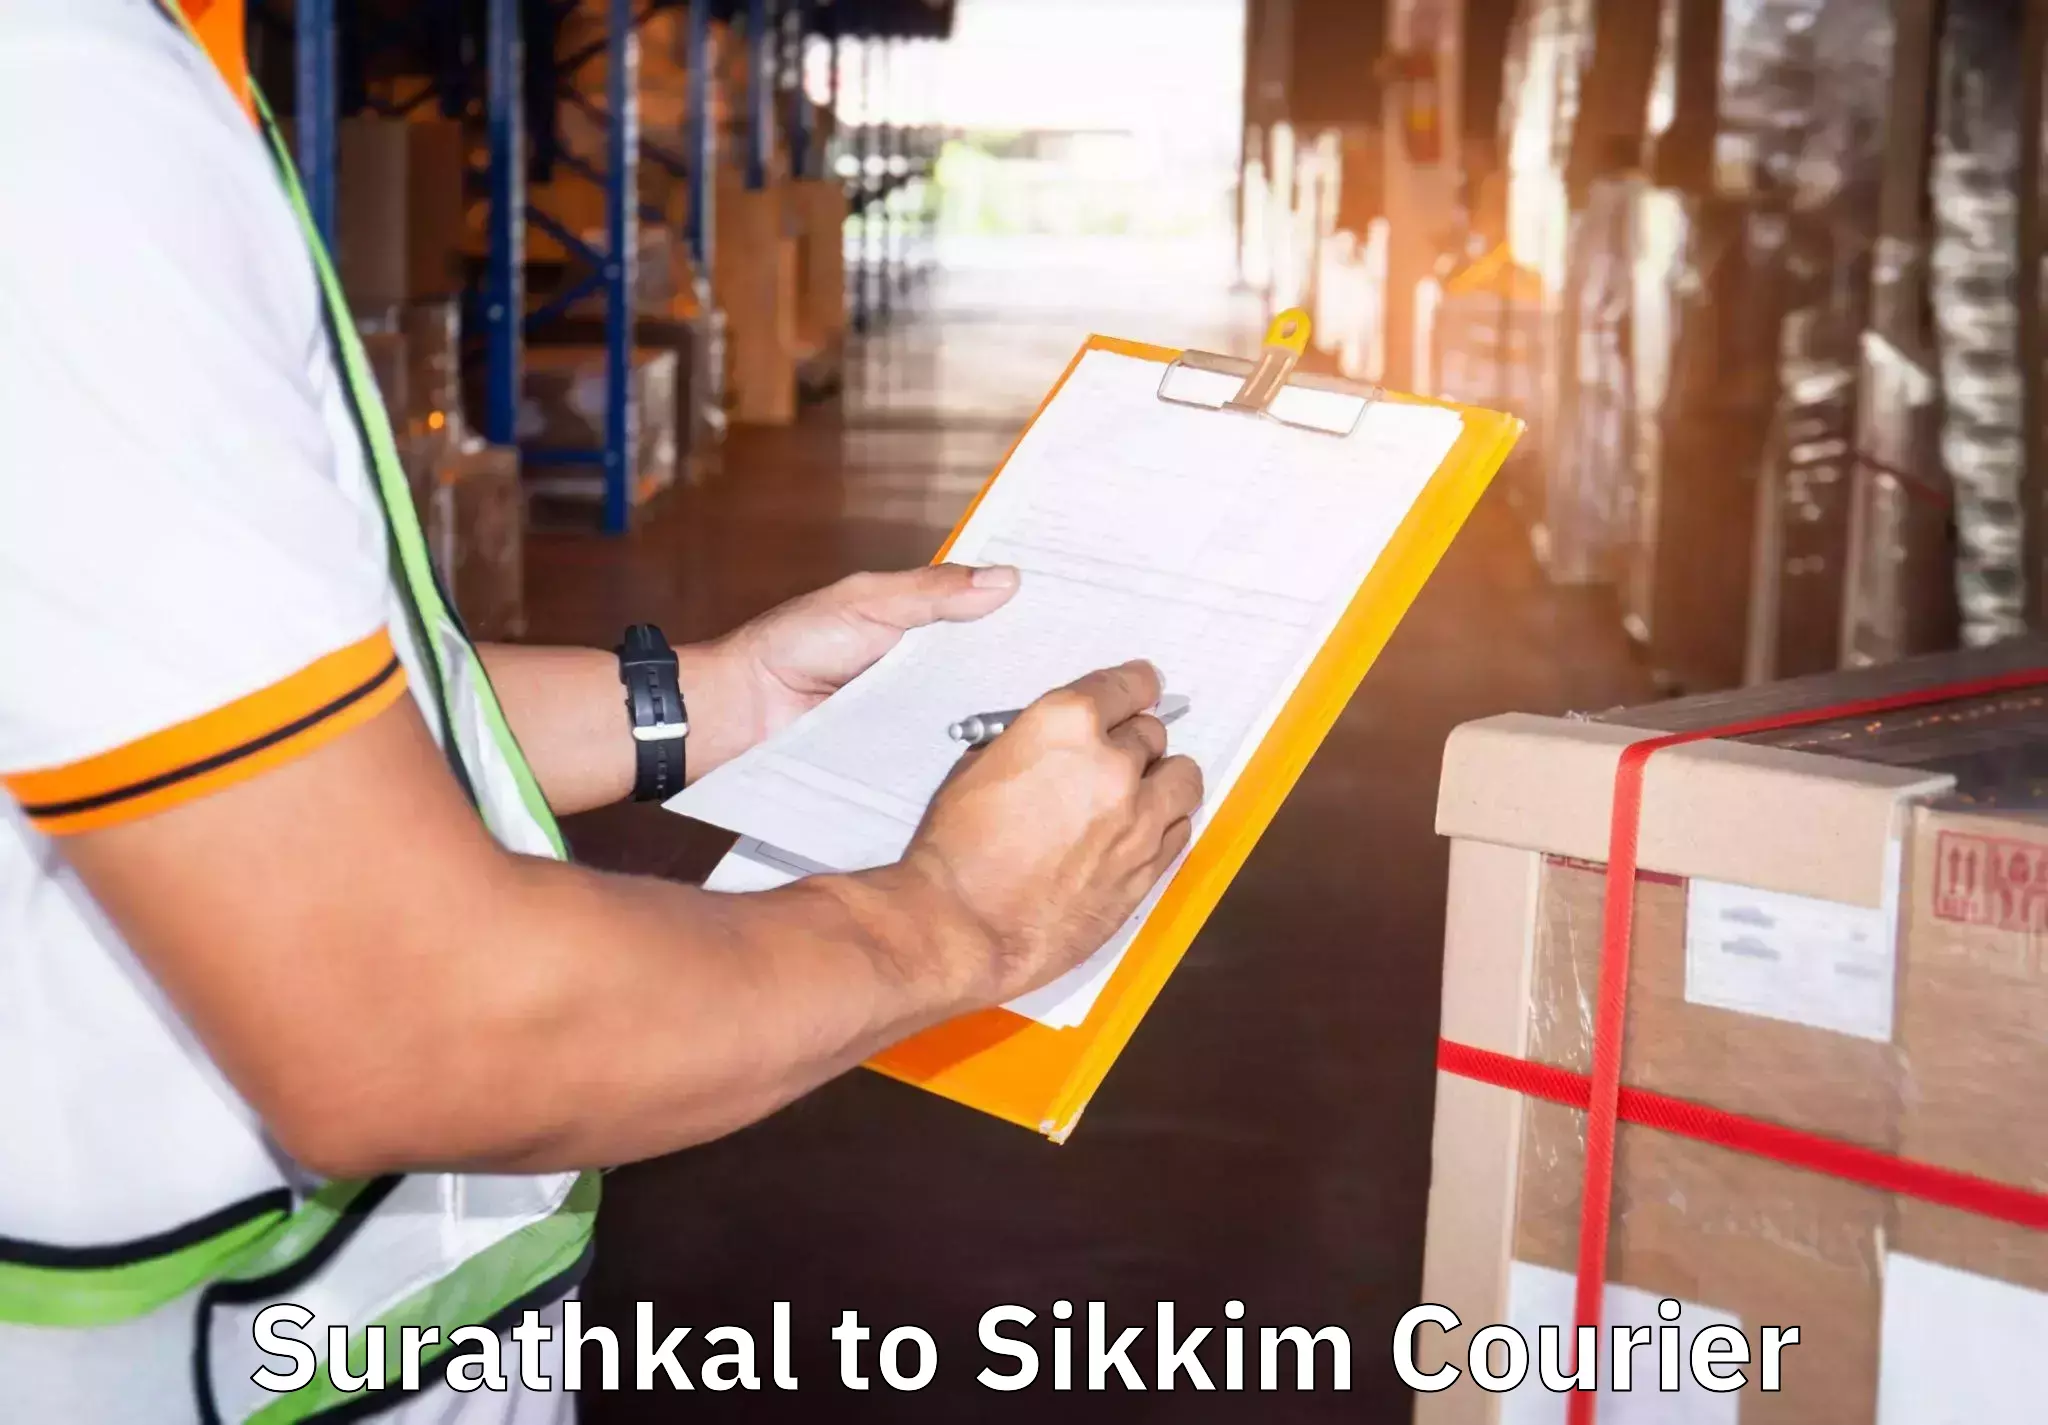 Specialized moving company Surathkal to Pelling